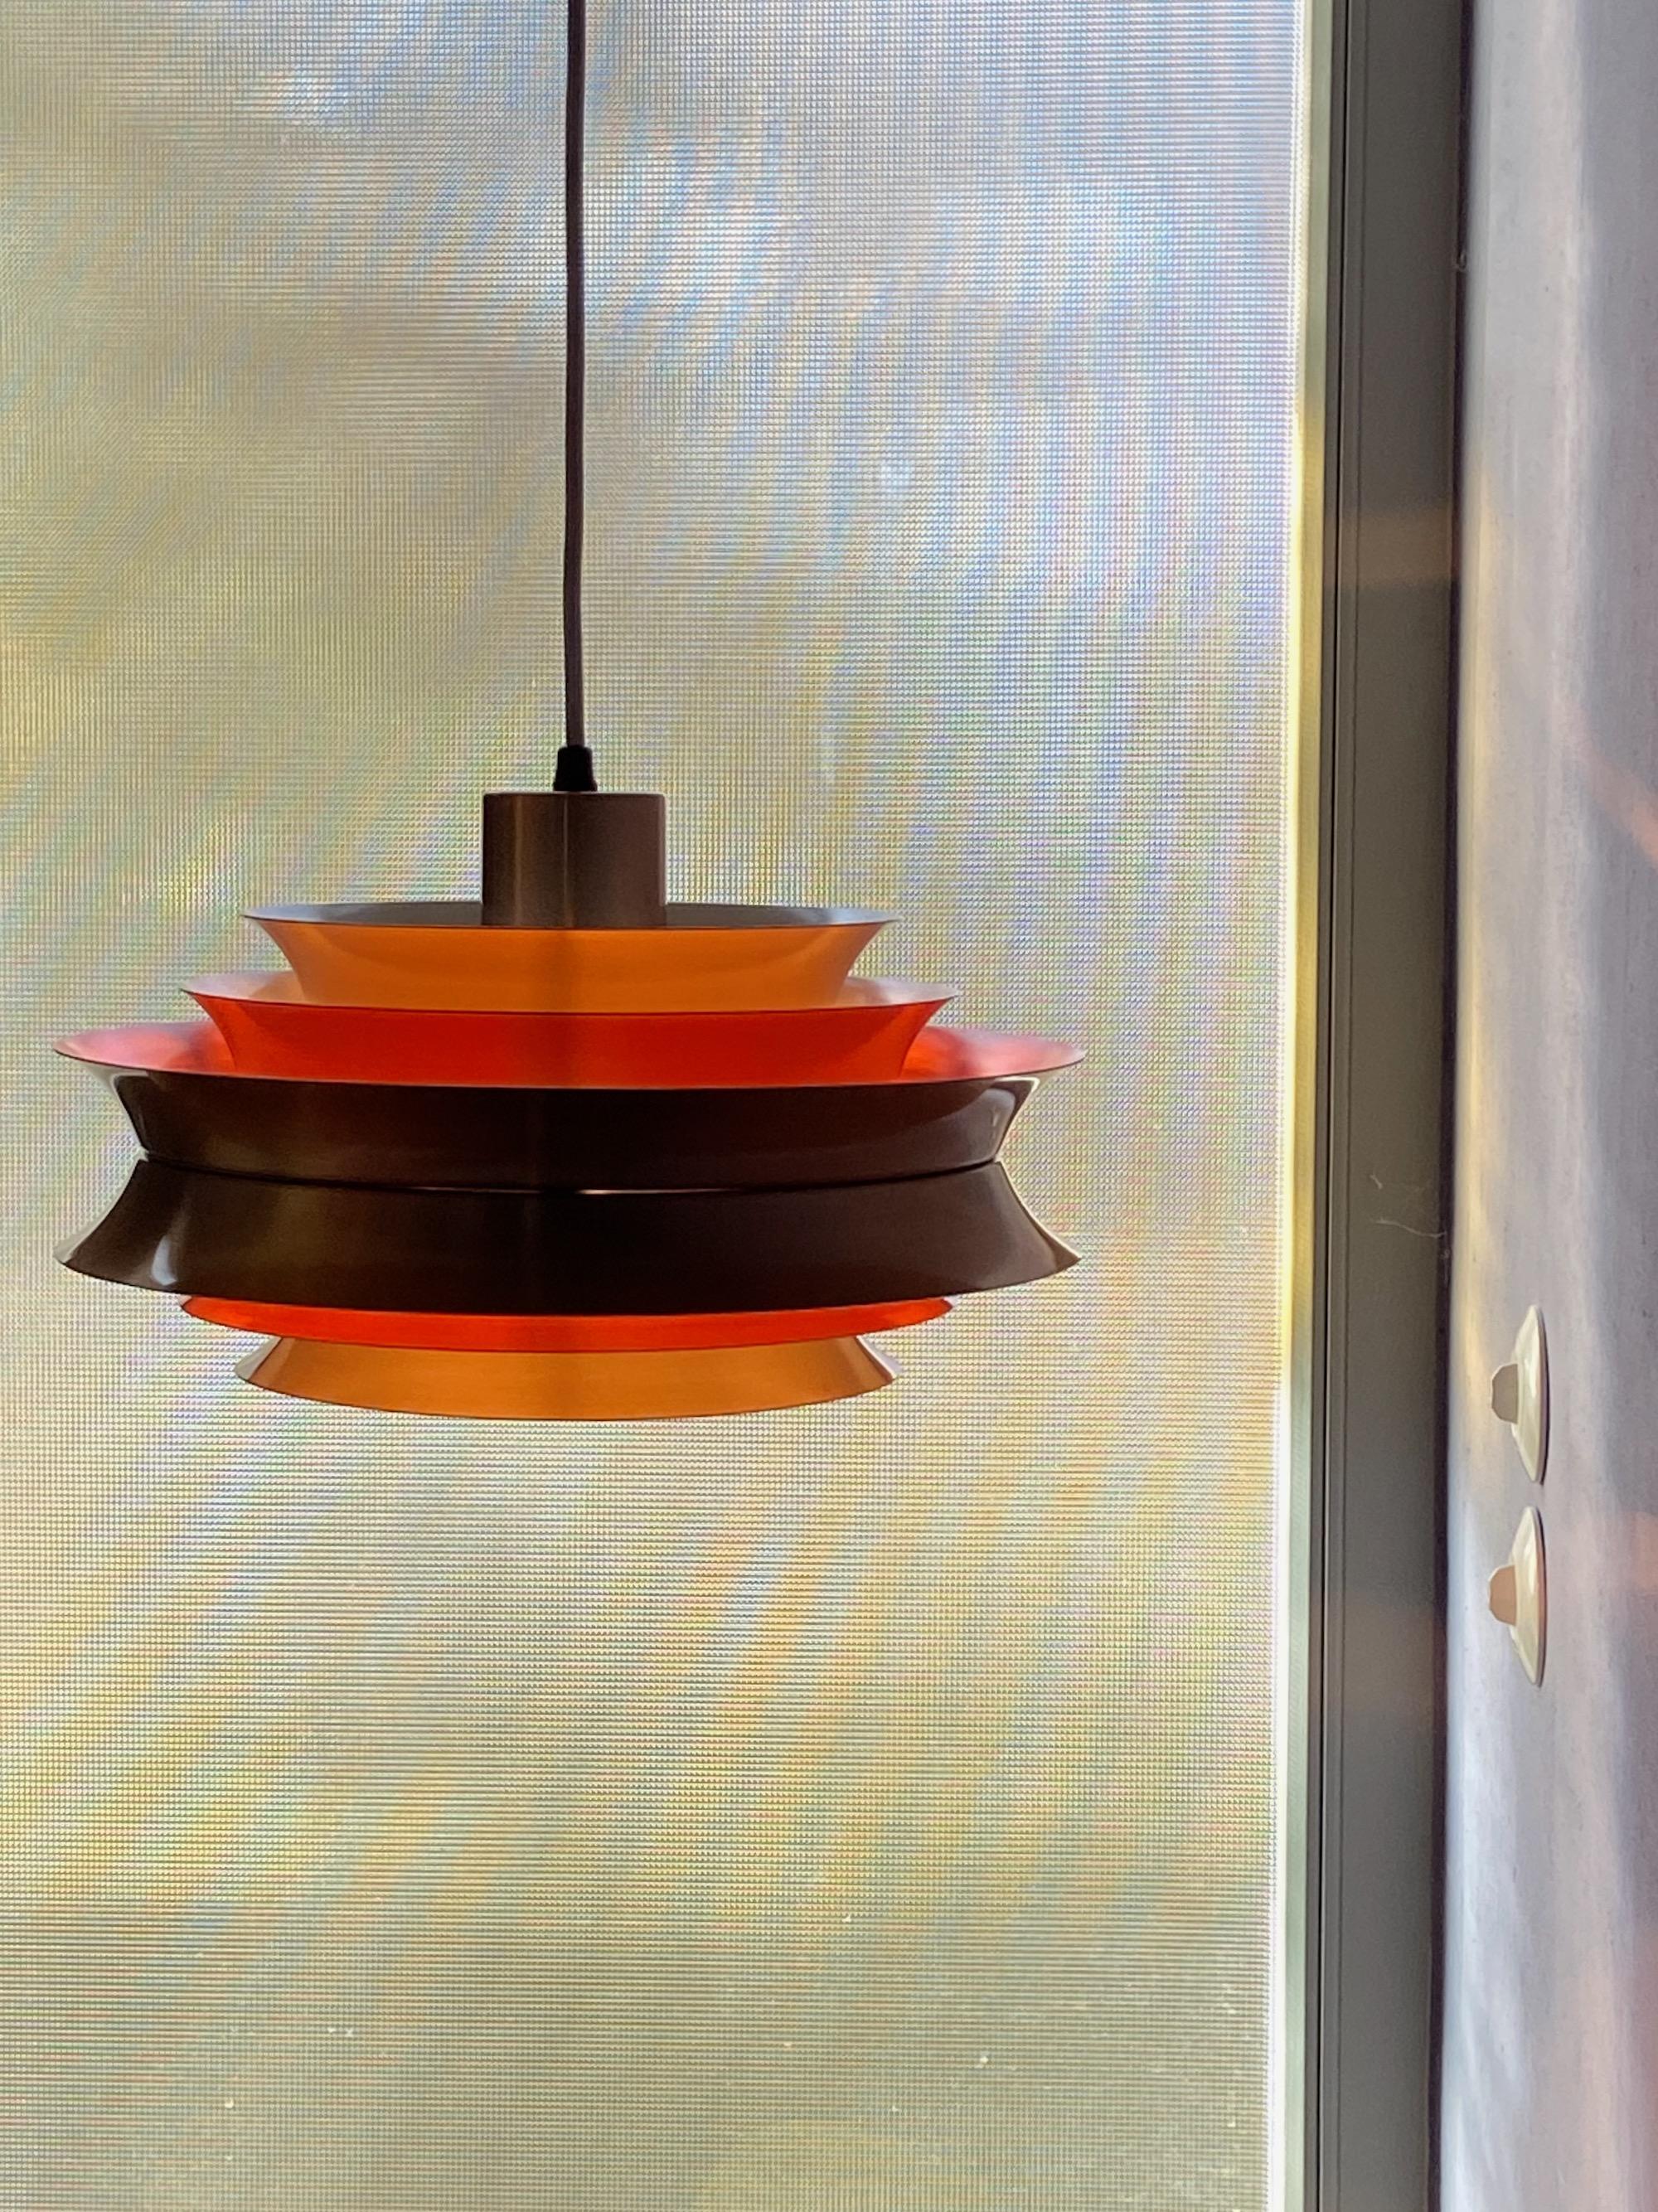 Nice vintage Trava pendant lamp design Carl Thore in 1960’s produced by Granhaga Metalindustri, Made in Sweden. The lamp is in good condition. No parts missing, with new fabric electric cord.
With 1 x 27 Edison screw sockets ready to use with 110